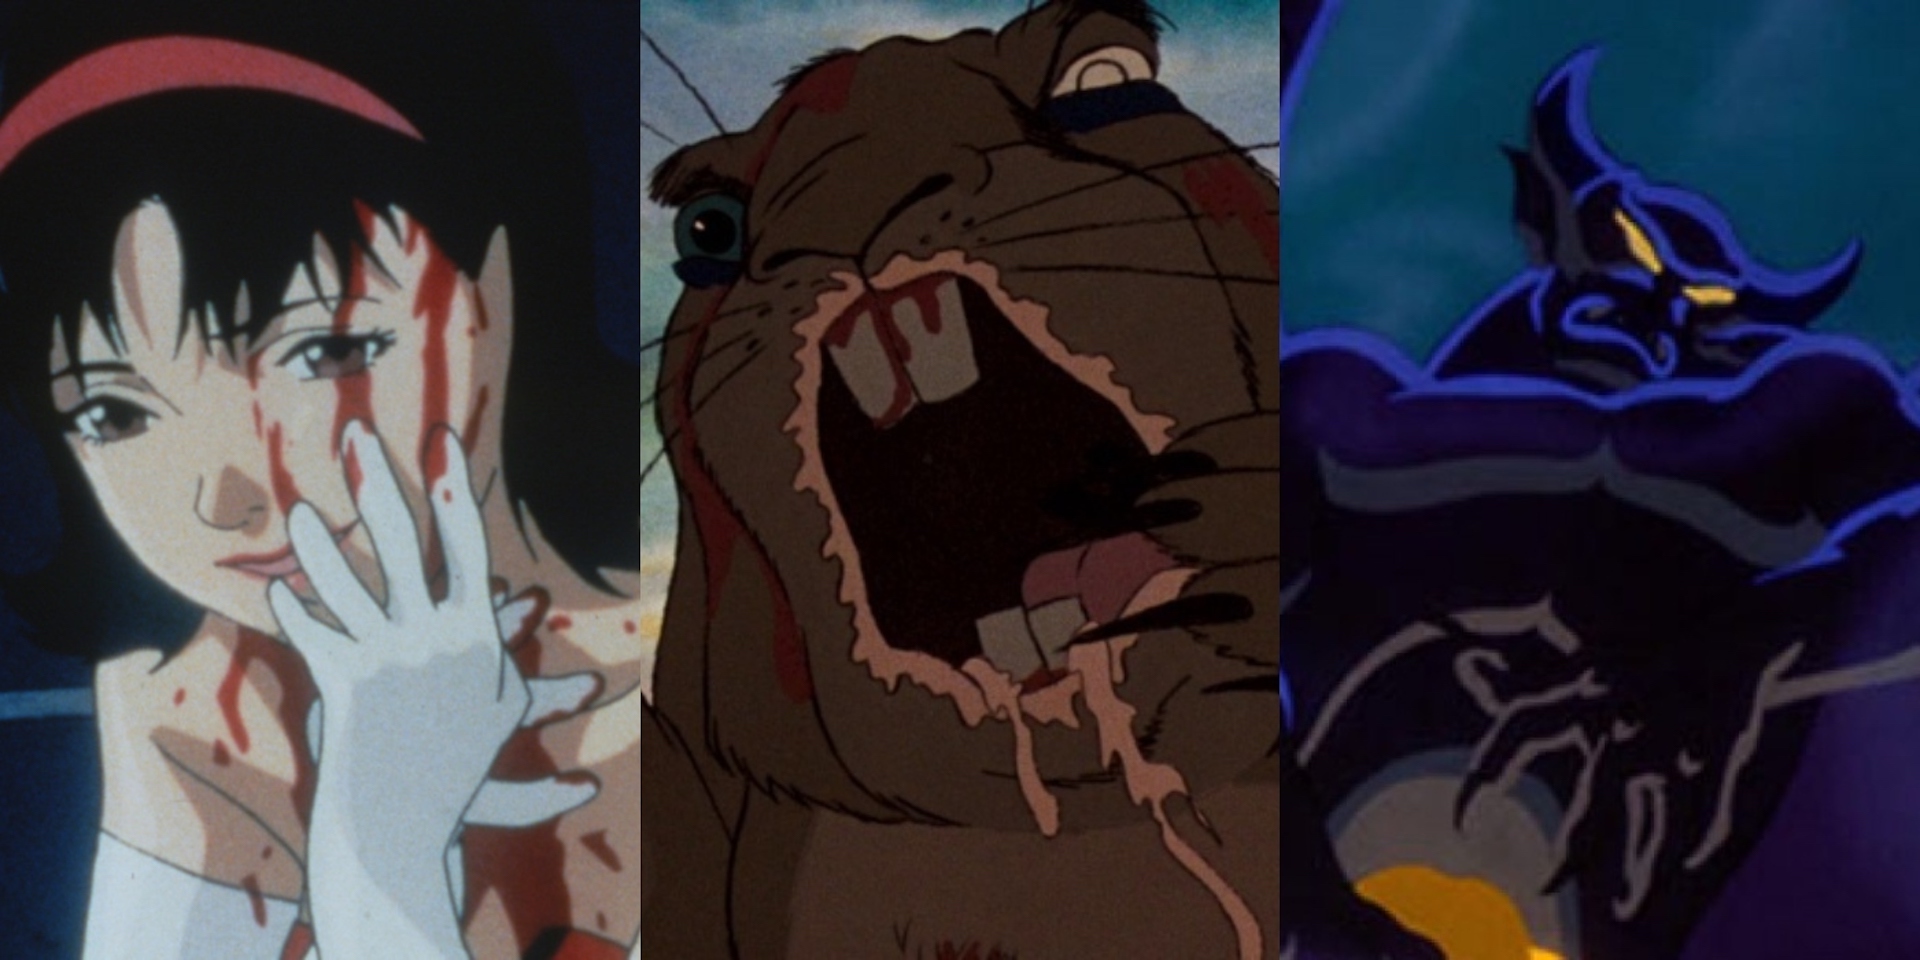 Scares in color: The best animated horror movies to check out tonight